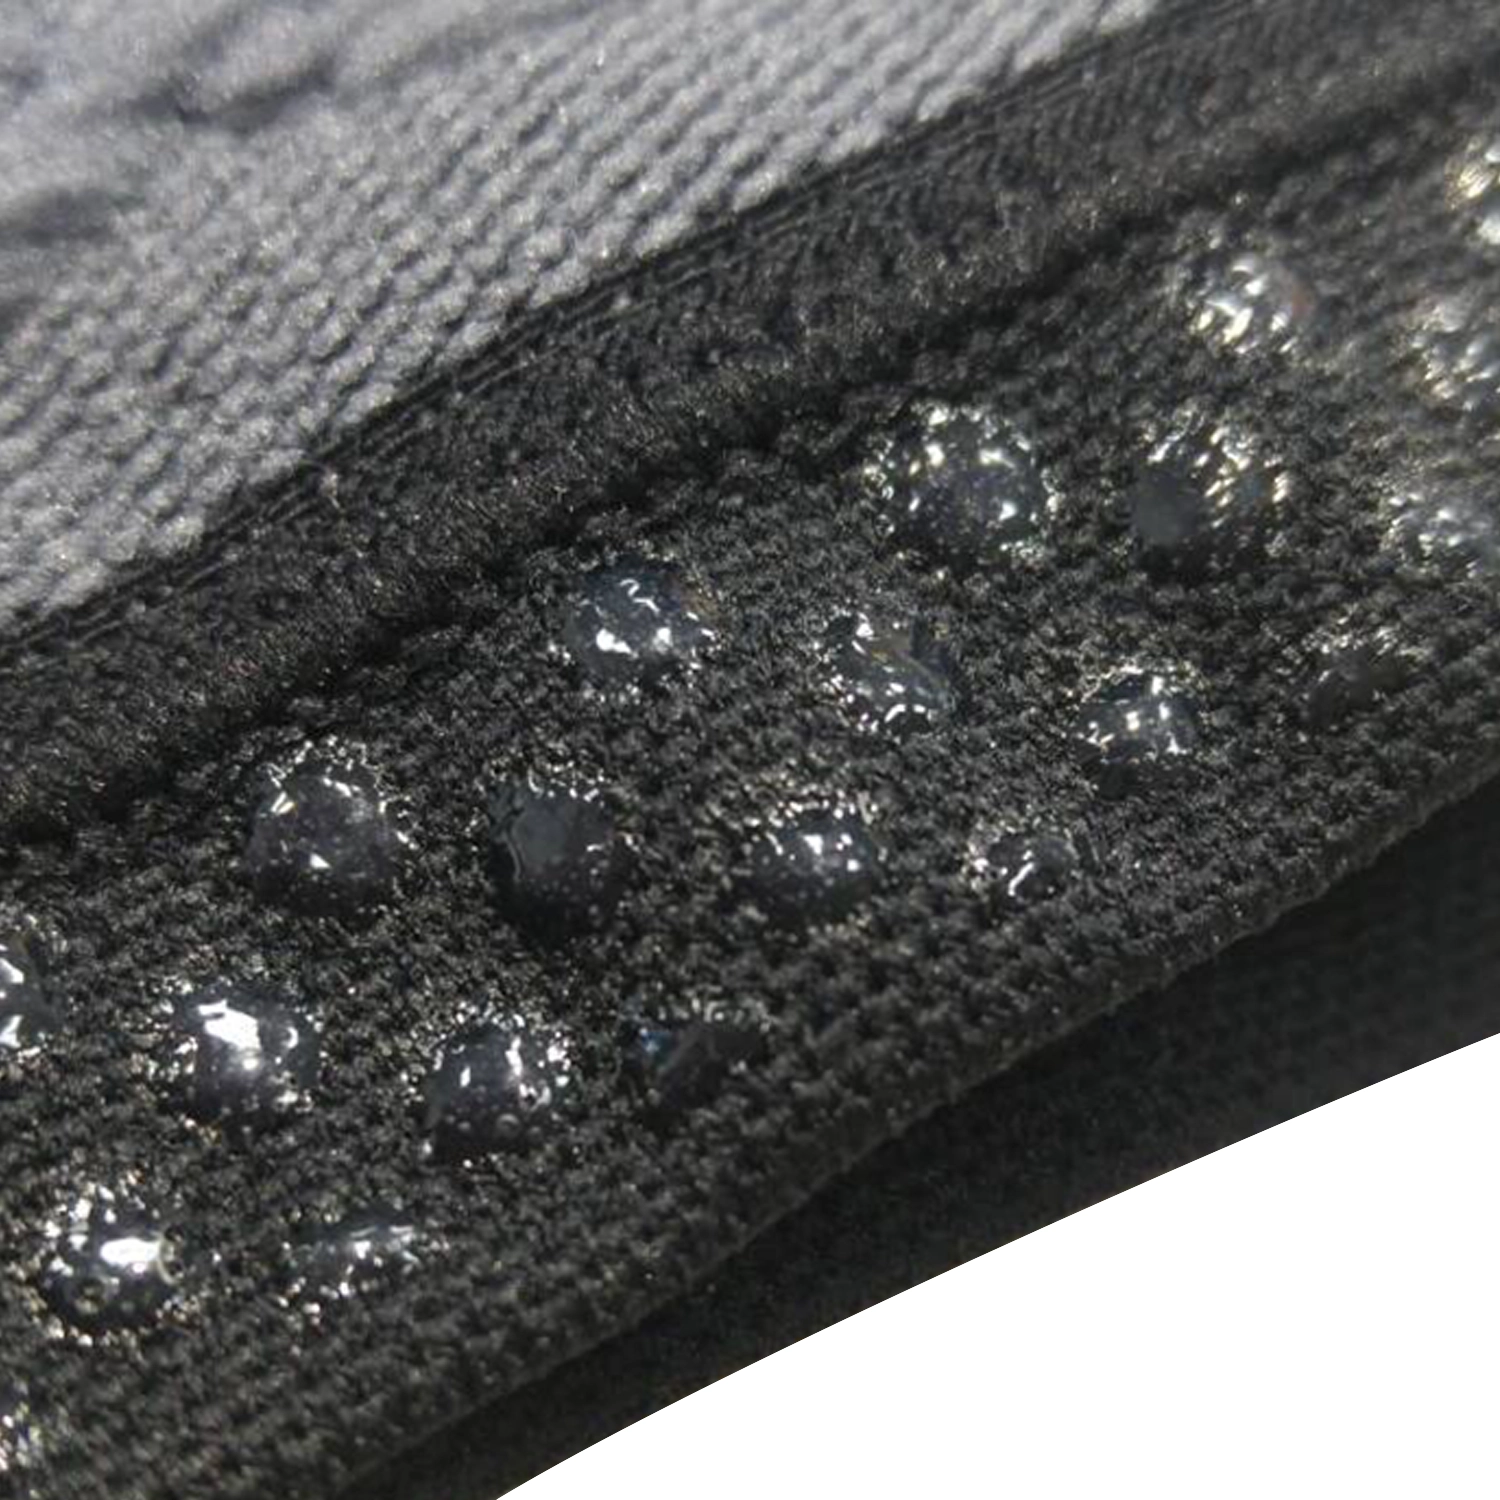 IT3 Performance ITB sleeve closeup showing the hypoallergenic silicone gel grips that keep the sleeve in place | OS1st